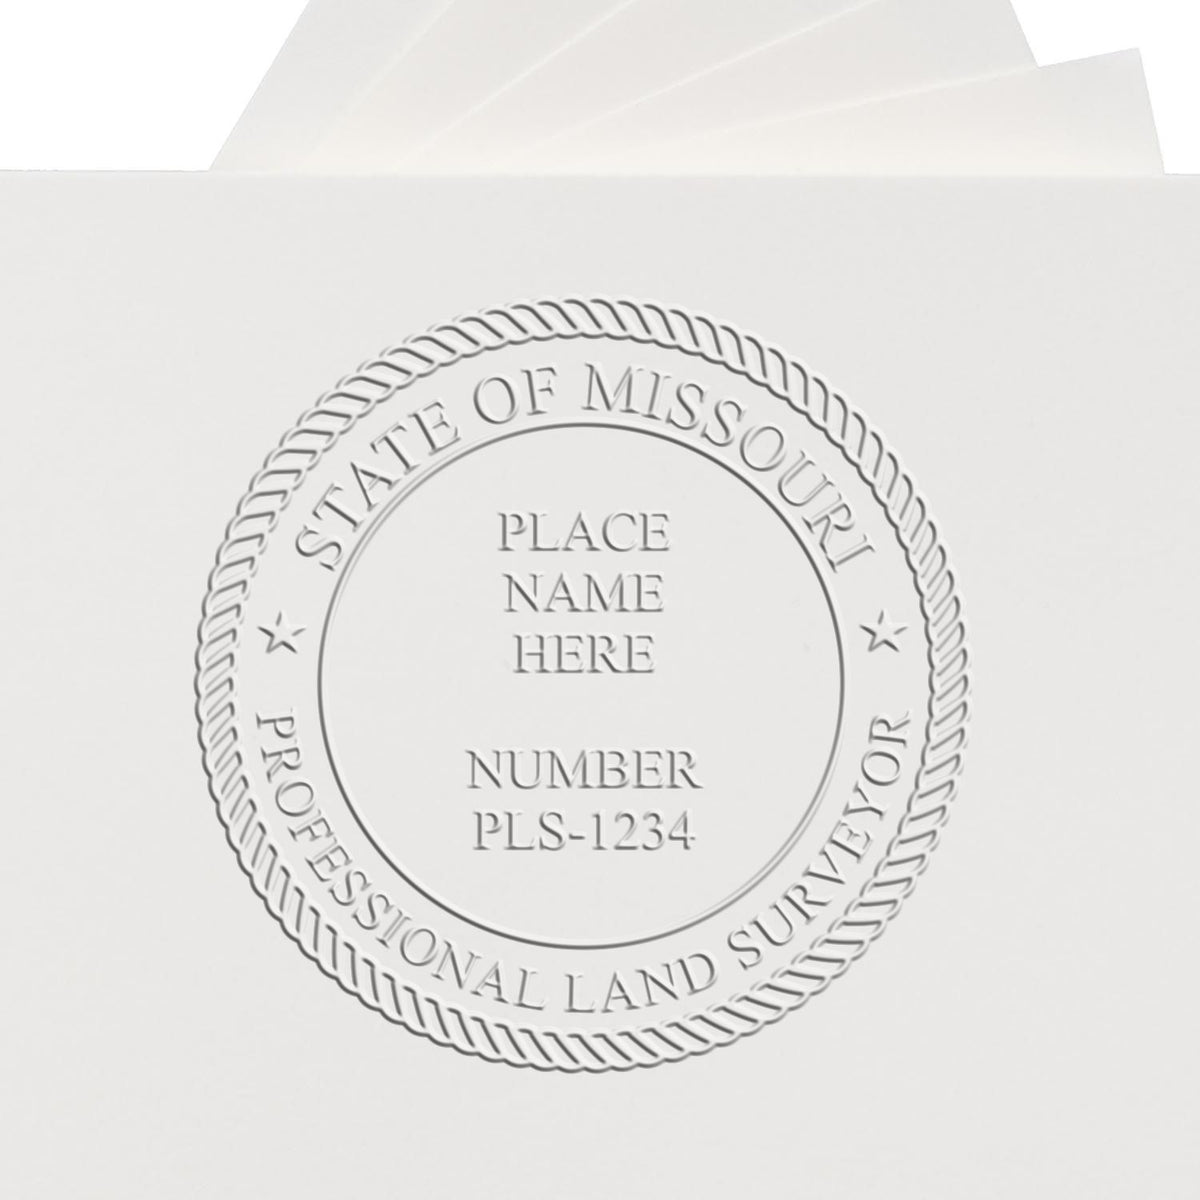 An in use photo of the Hybrid Missouri Land Surveyor Seal showing a sample imprint on a cardstock